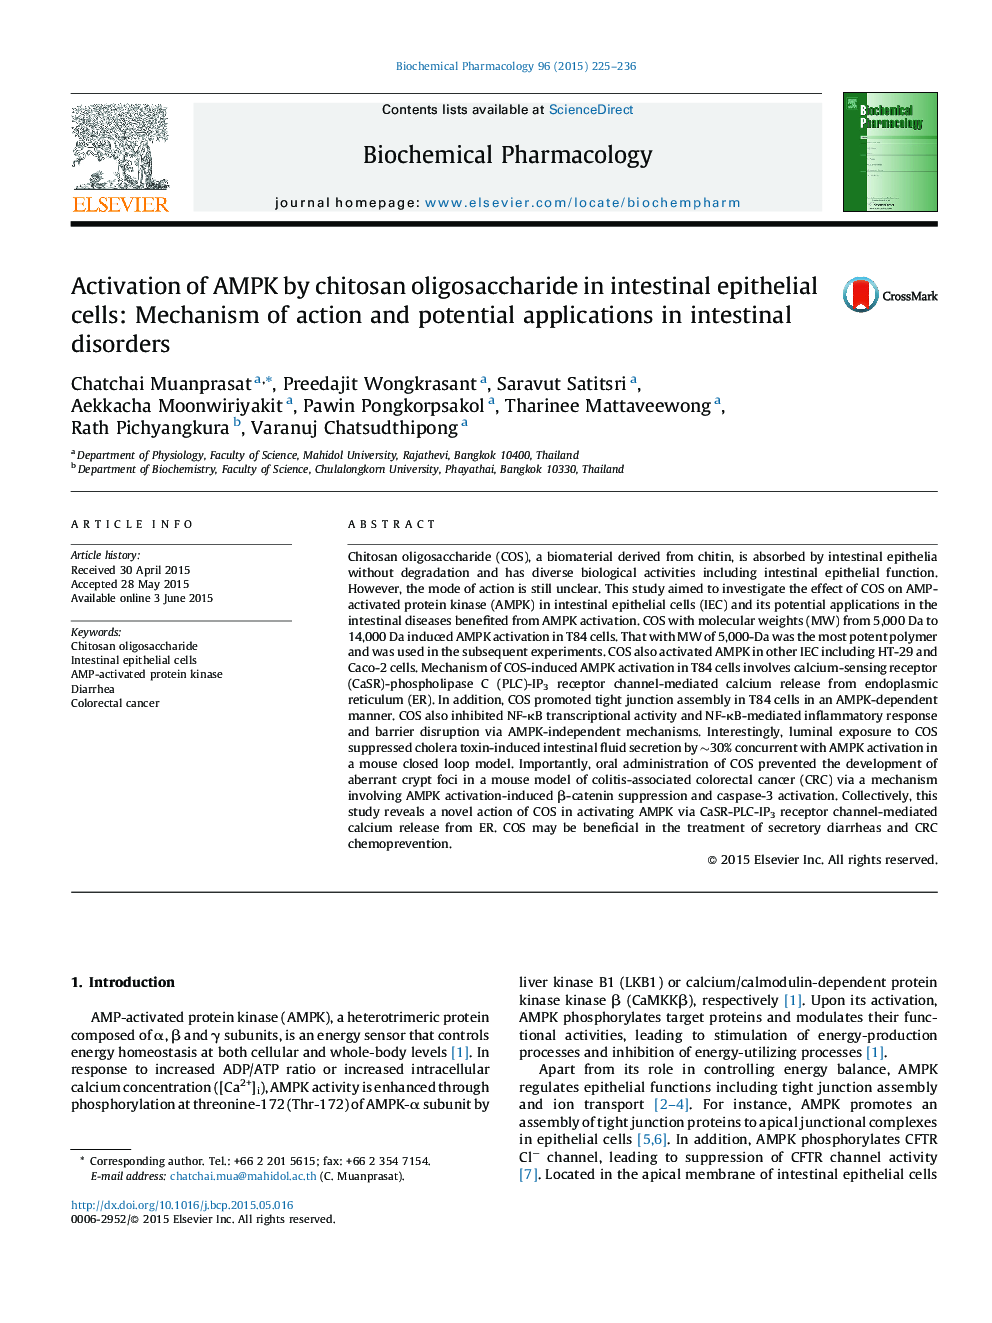 Activation of AMPK by chitosan oligosaccharide in intestinal epithelial cells: Mechanism of action and potential applications in intestinal disorders